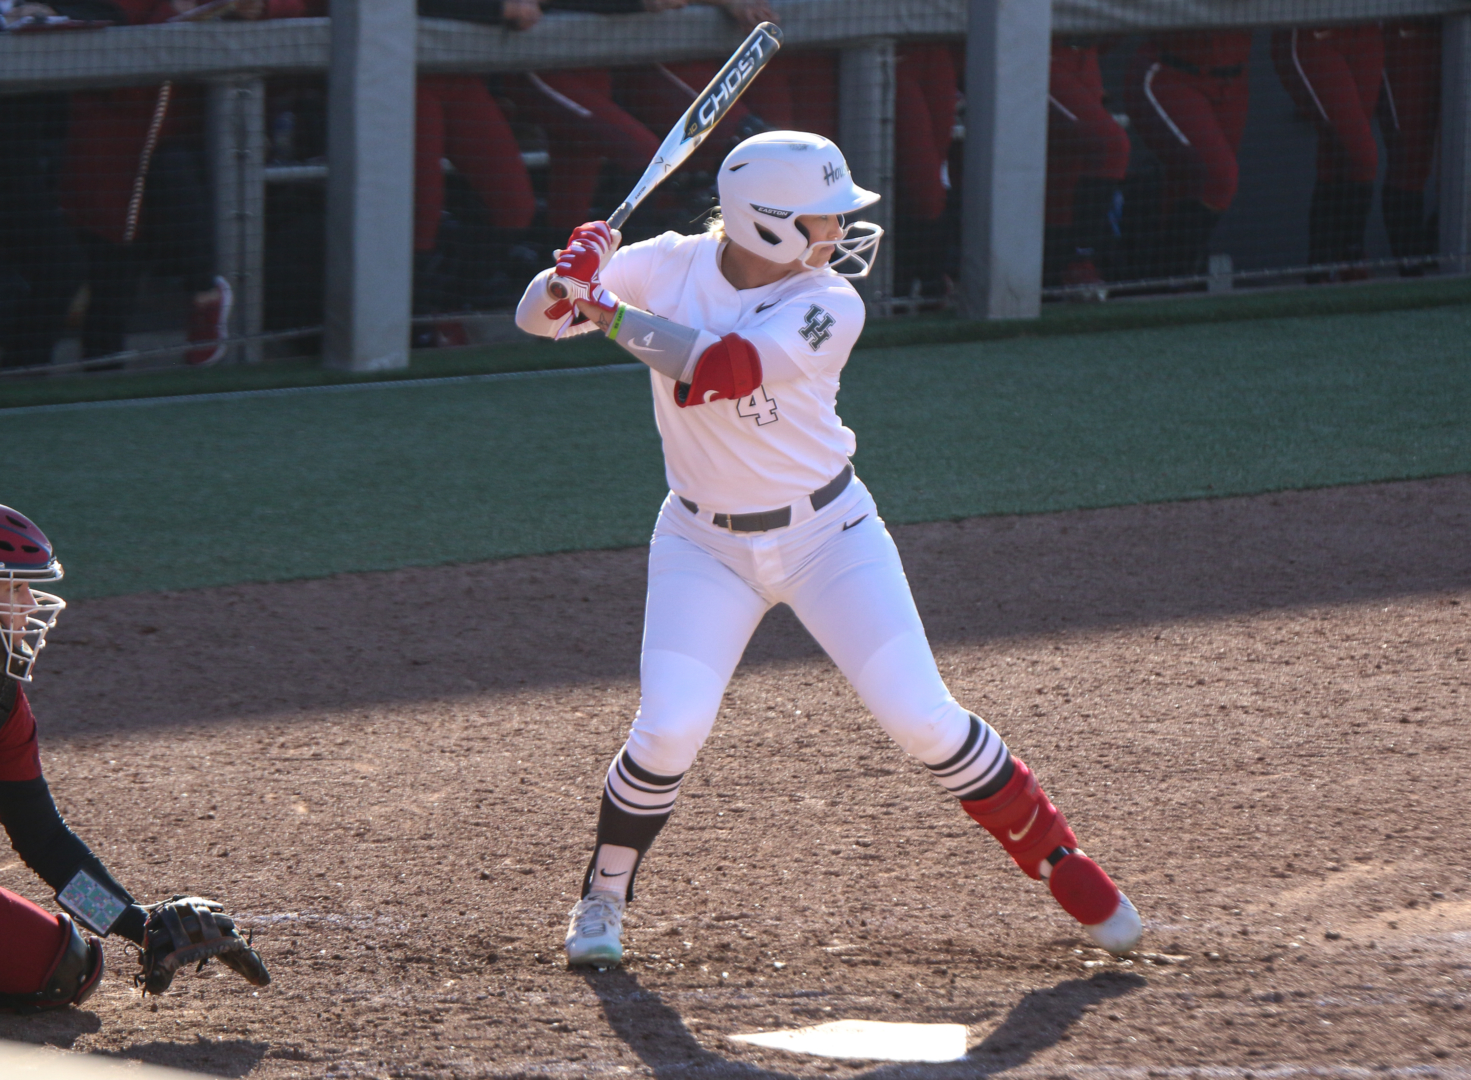 Aspen Howie drove in two of UH softball's four runs in the Cougars' loss to Texas in Austin on Wednesday night. | Sean Thomas/The Cougar